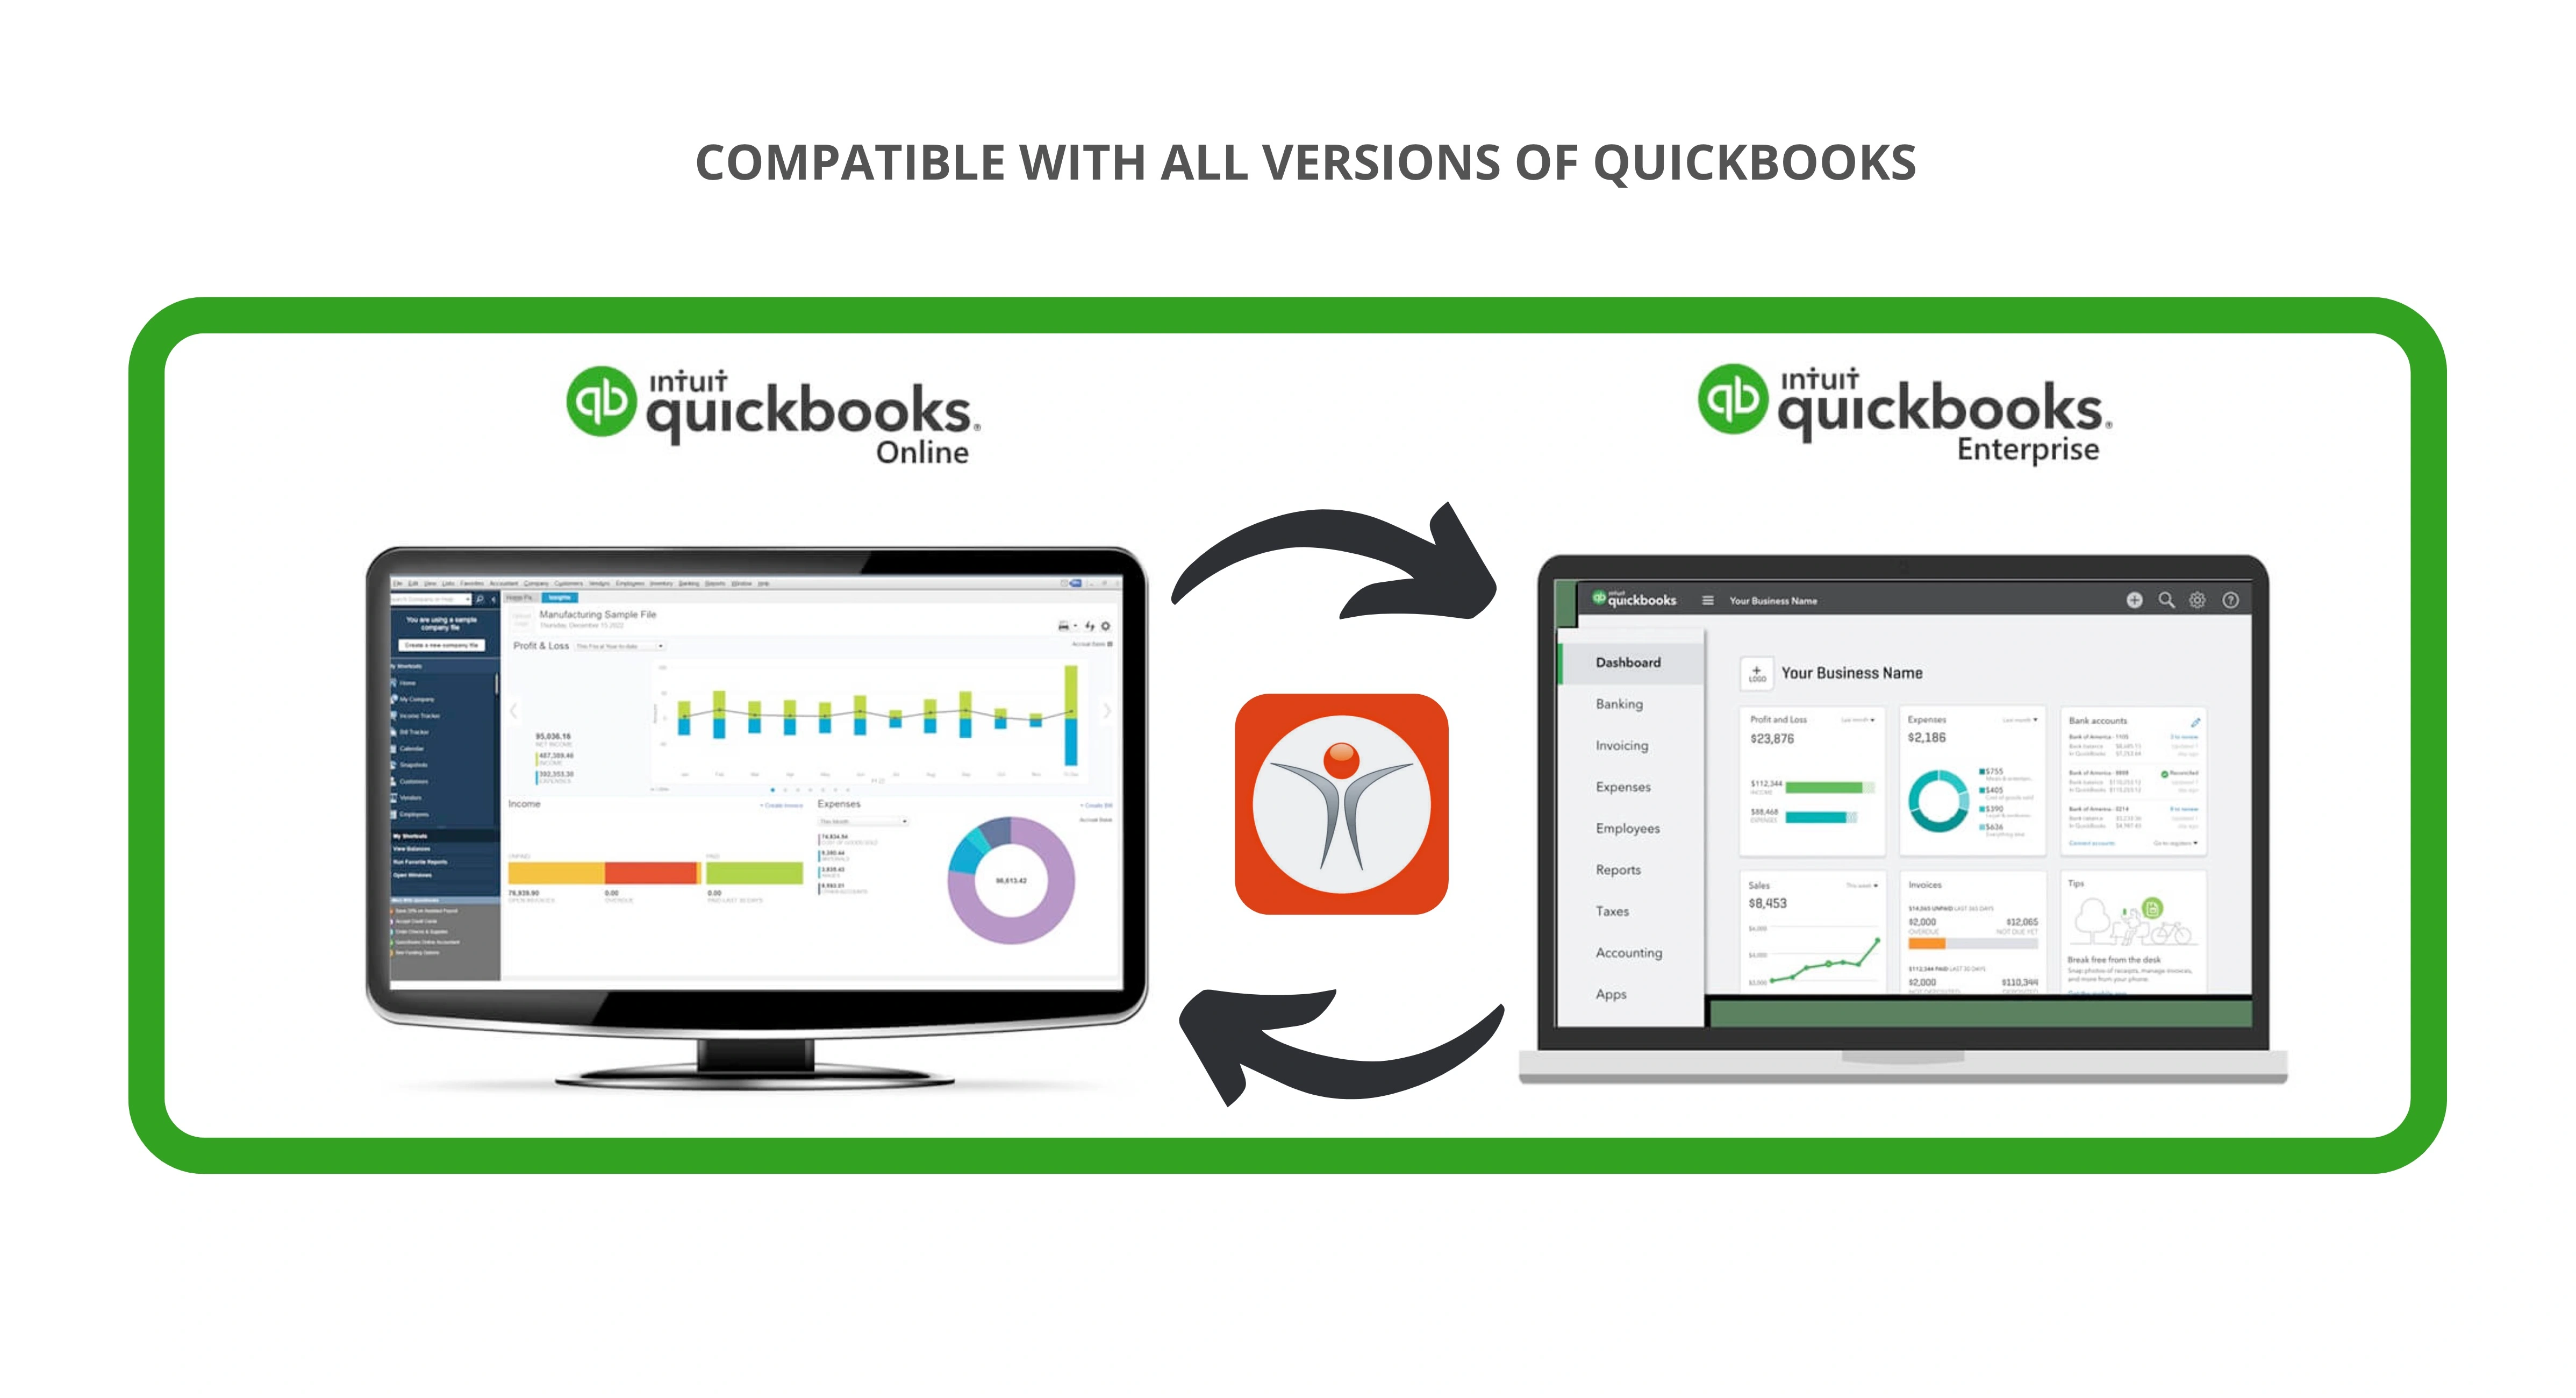 Mobiwork's QuickBooks connector works with all versions of QuickBooks